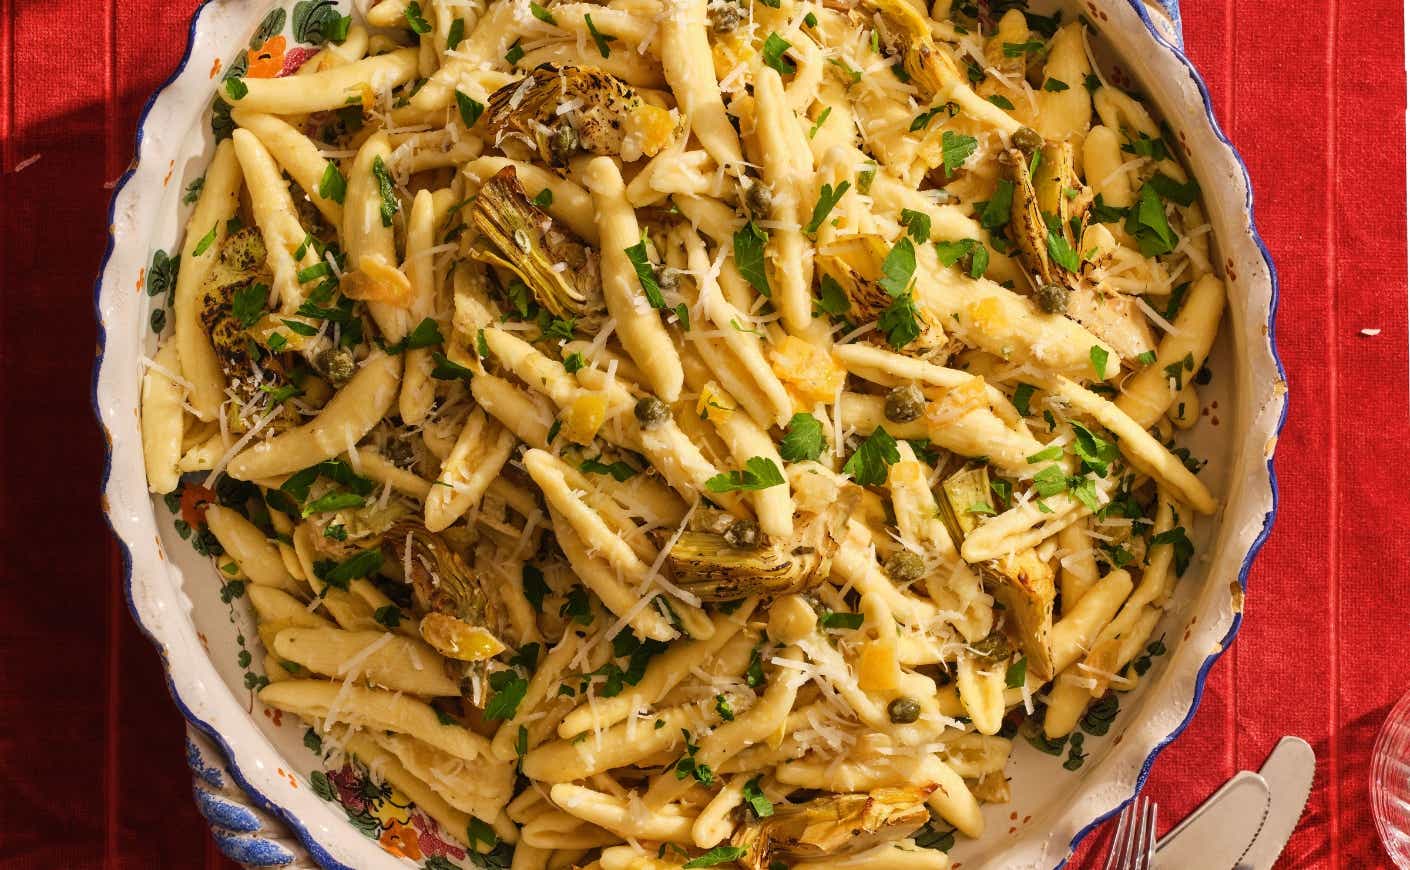 A bowl of pasta with roasted artichokes.